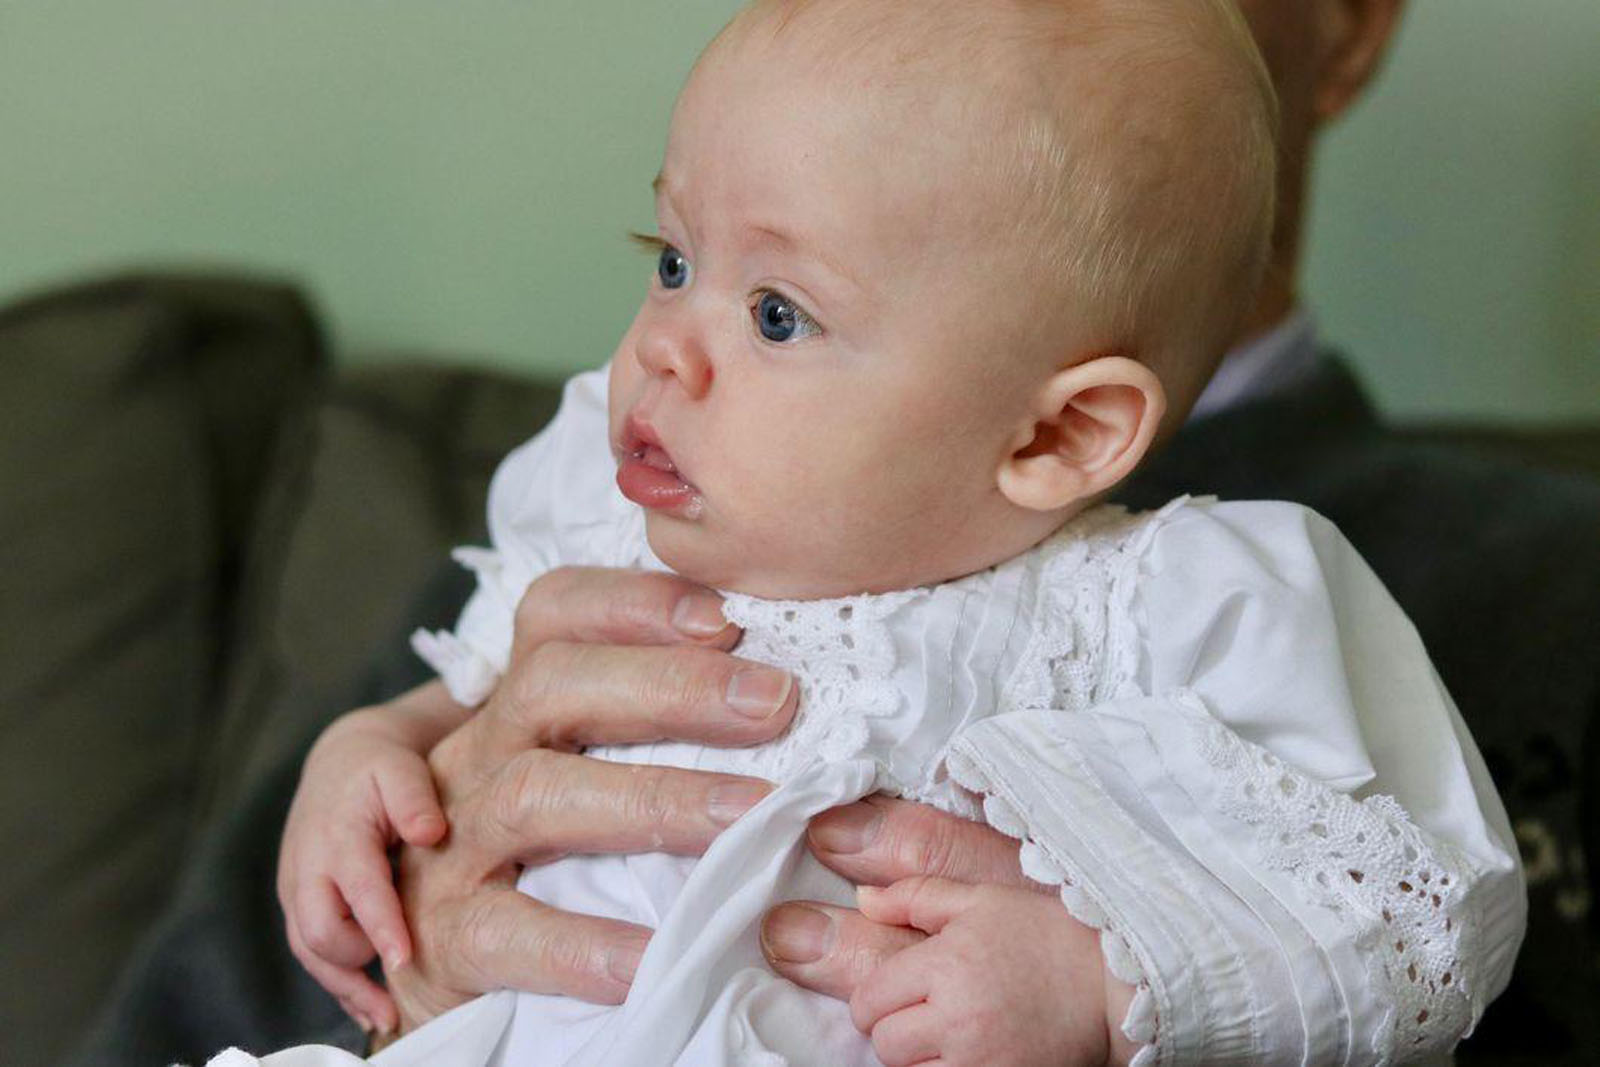 Baby in white dress being held up by hand around the body, waiting to take part in their Celebrant Naming Ceremony.